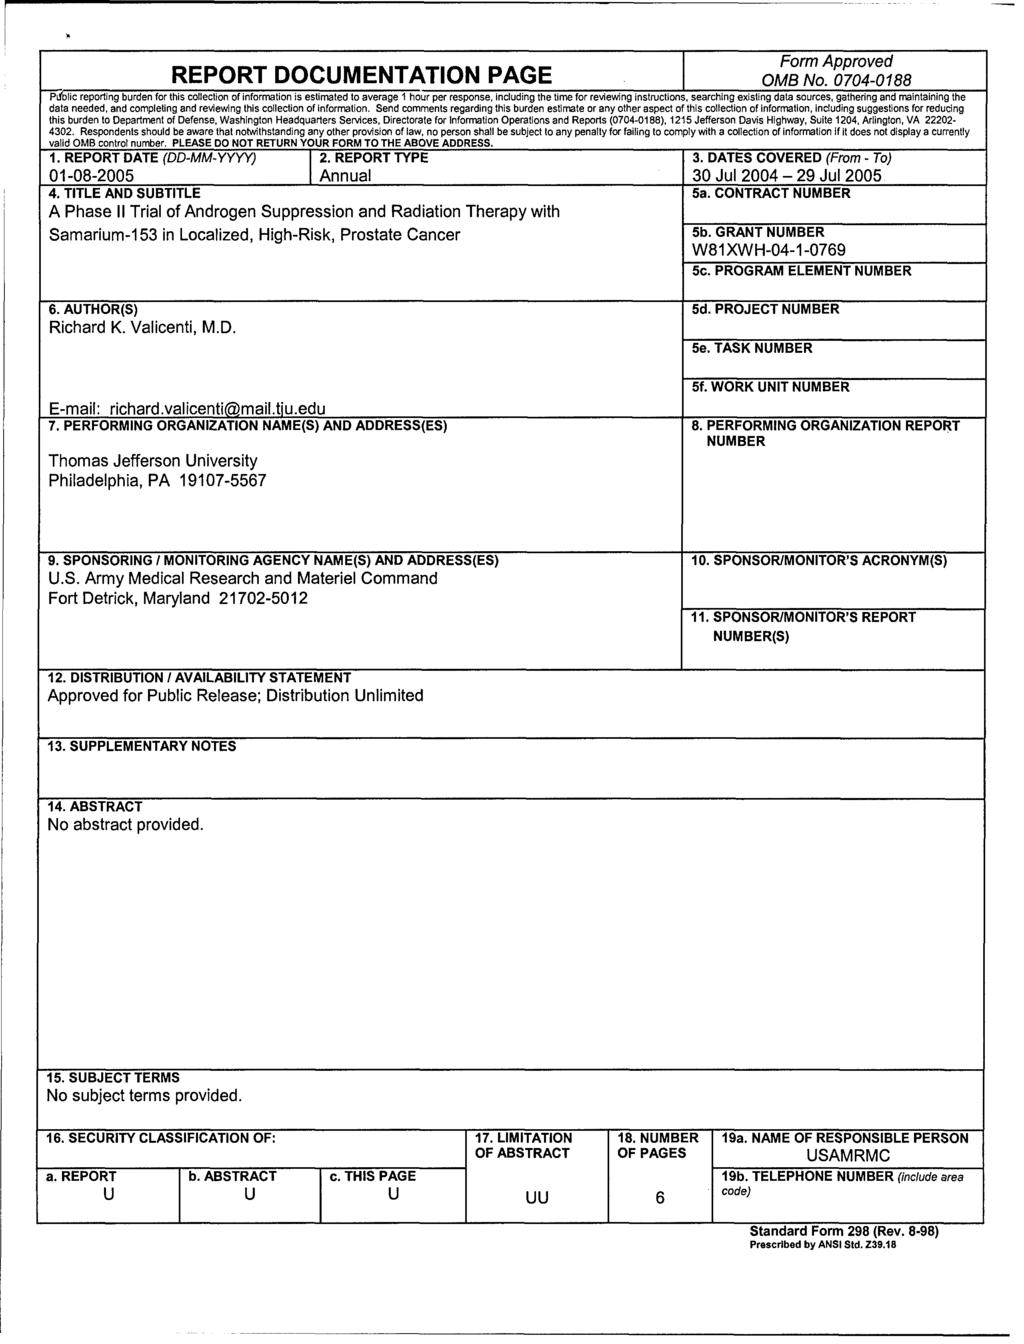 Form Approved REPORT DOCUMENTATION PAGE OMB No.